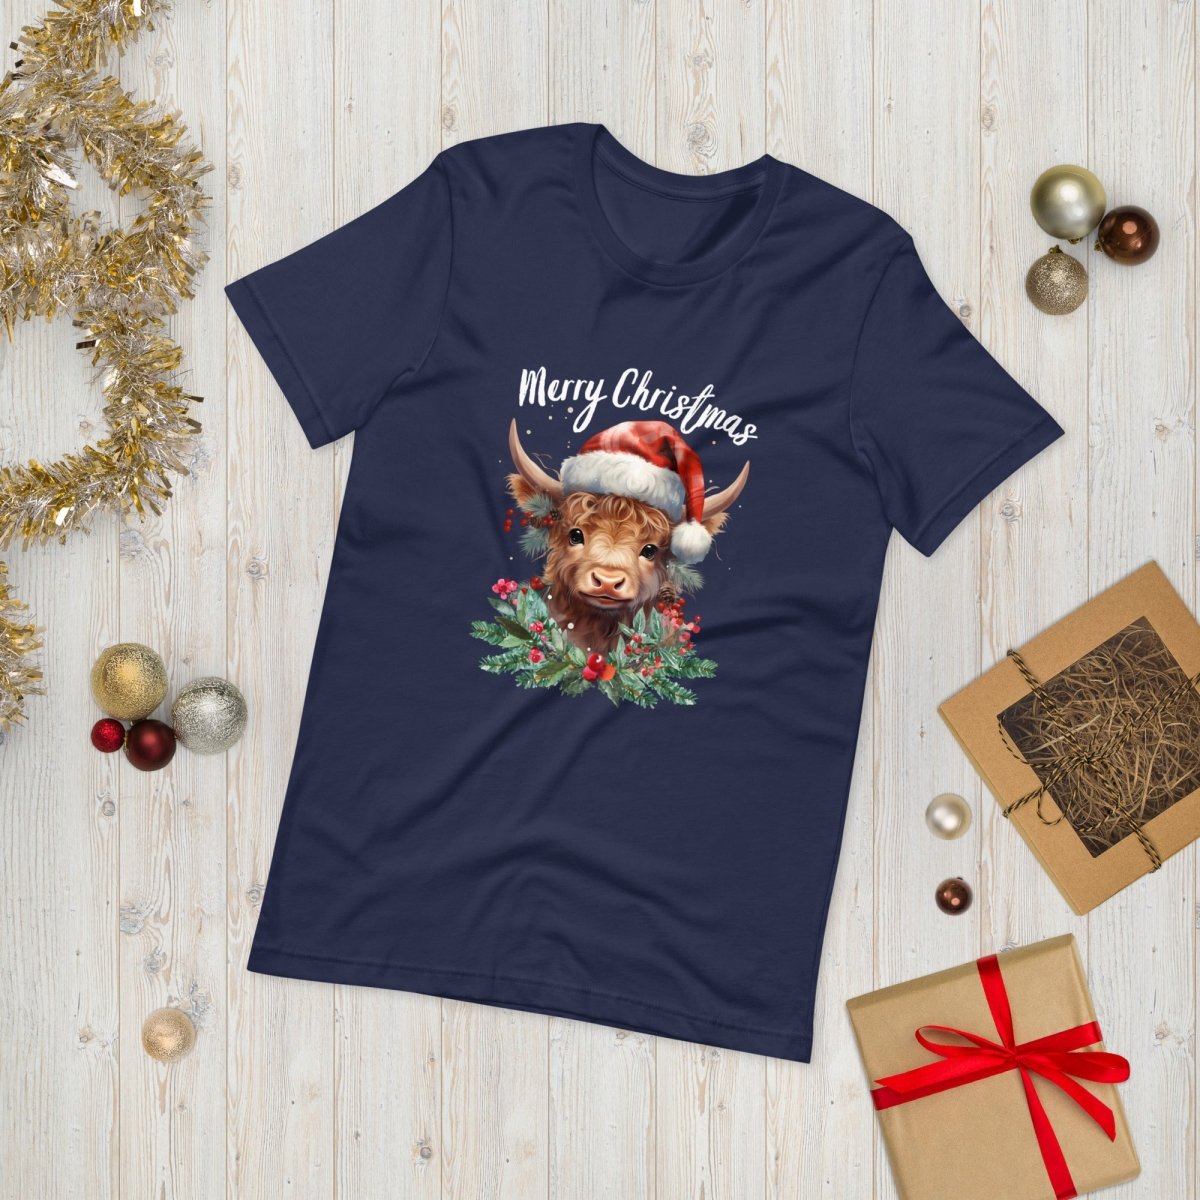 Christmas Highland Cow T-Shirt - High Quality Festive Family Unisex T-Shirts, Gift for Cow Lovers, Cute Christmas Shirt, Cow with Santa Hat - Everything Pixel